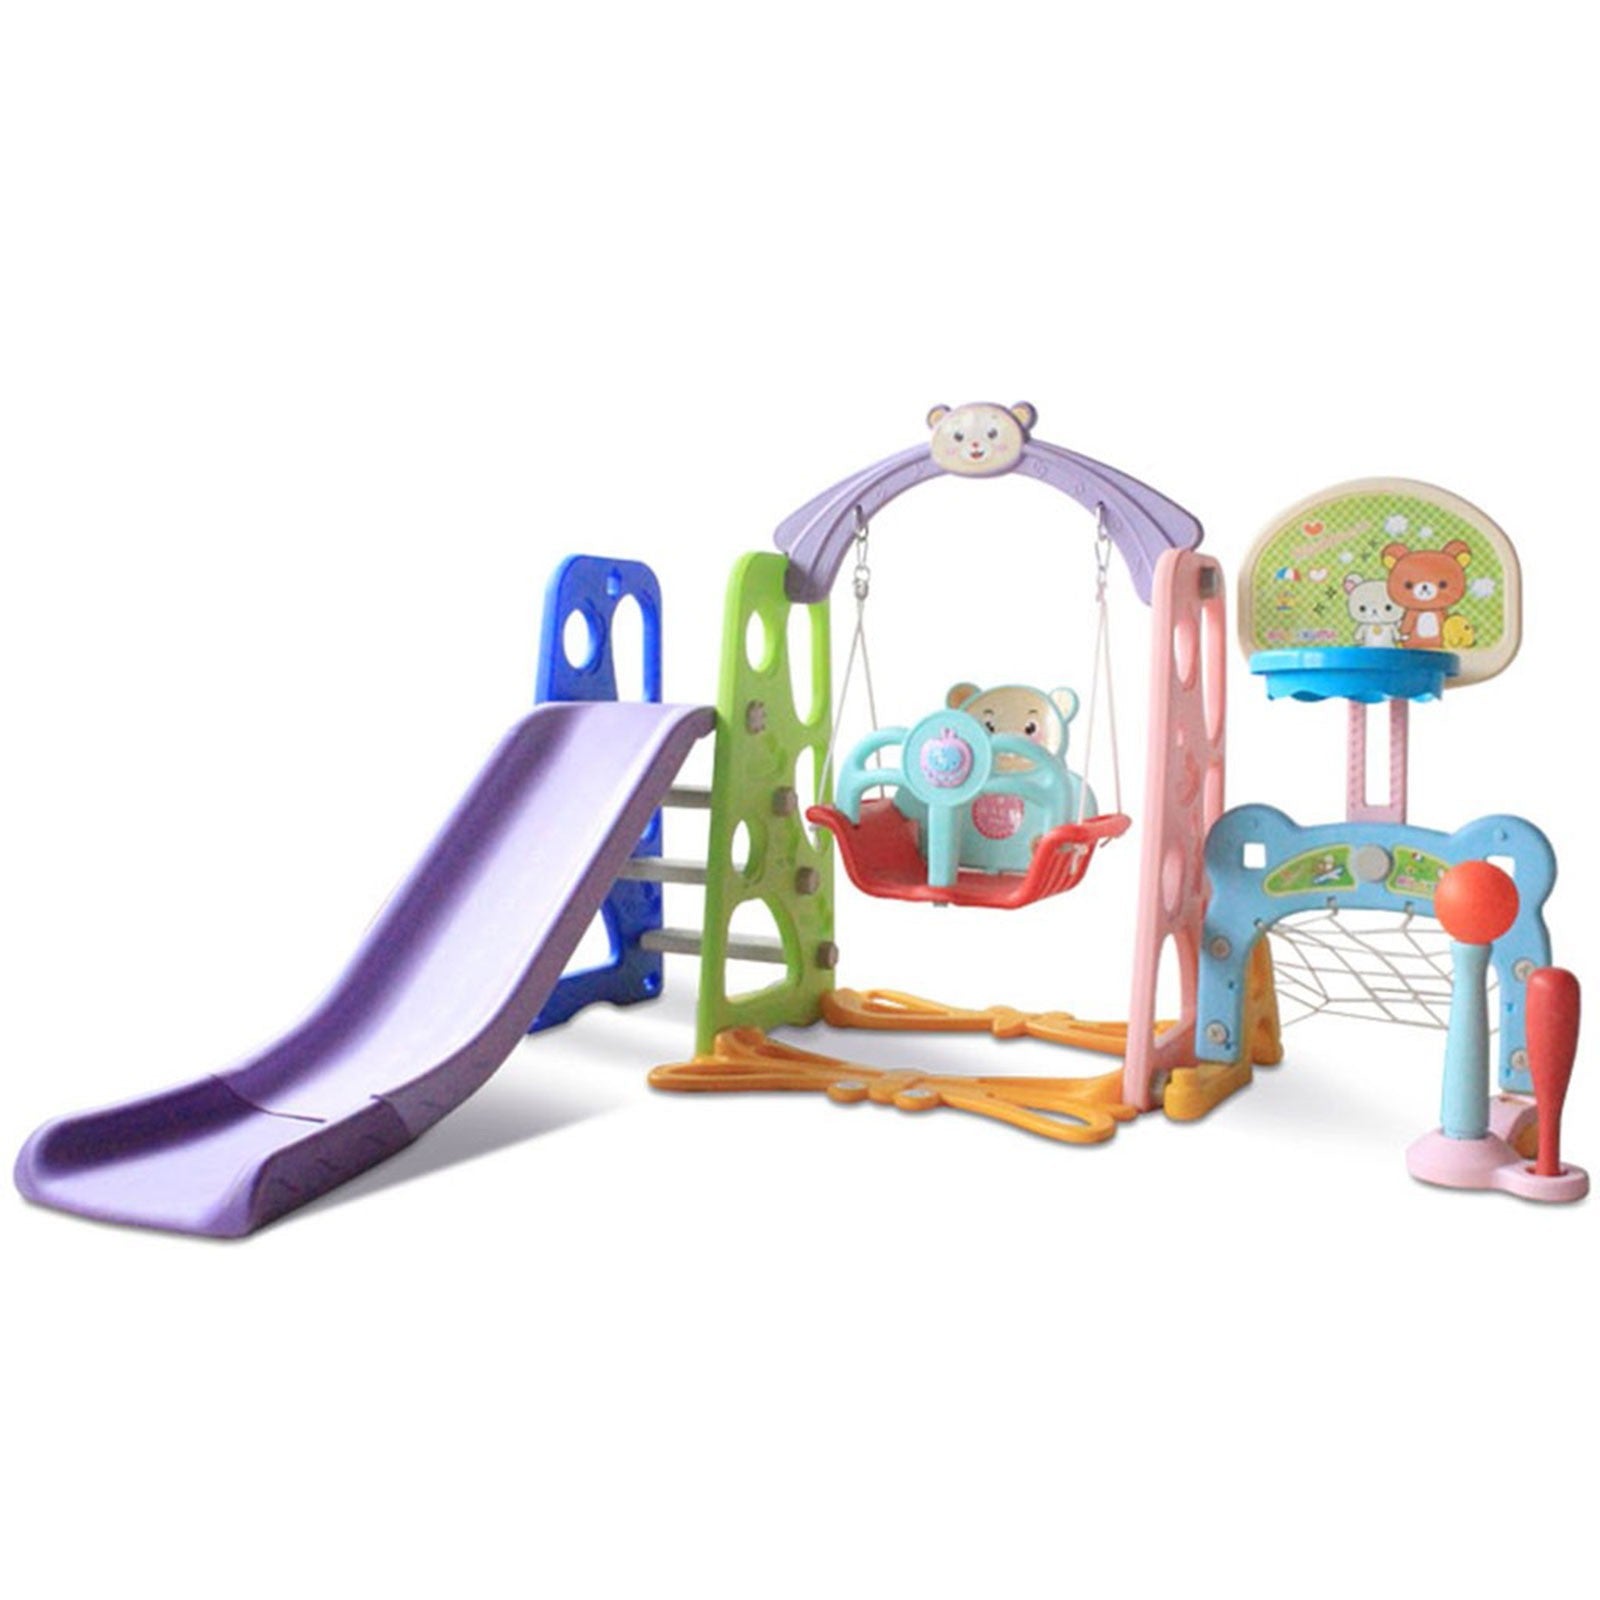 6 In 1 Kids Indoor And Outdoor Slide Swing And Basketball Football Baseball Set - TOYSHIP